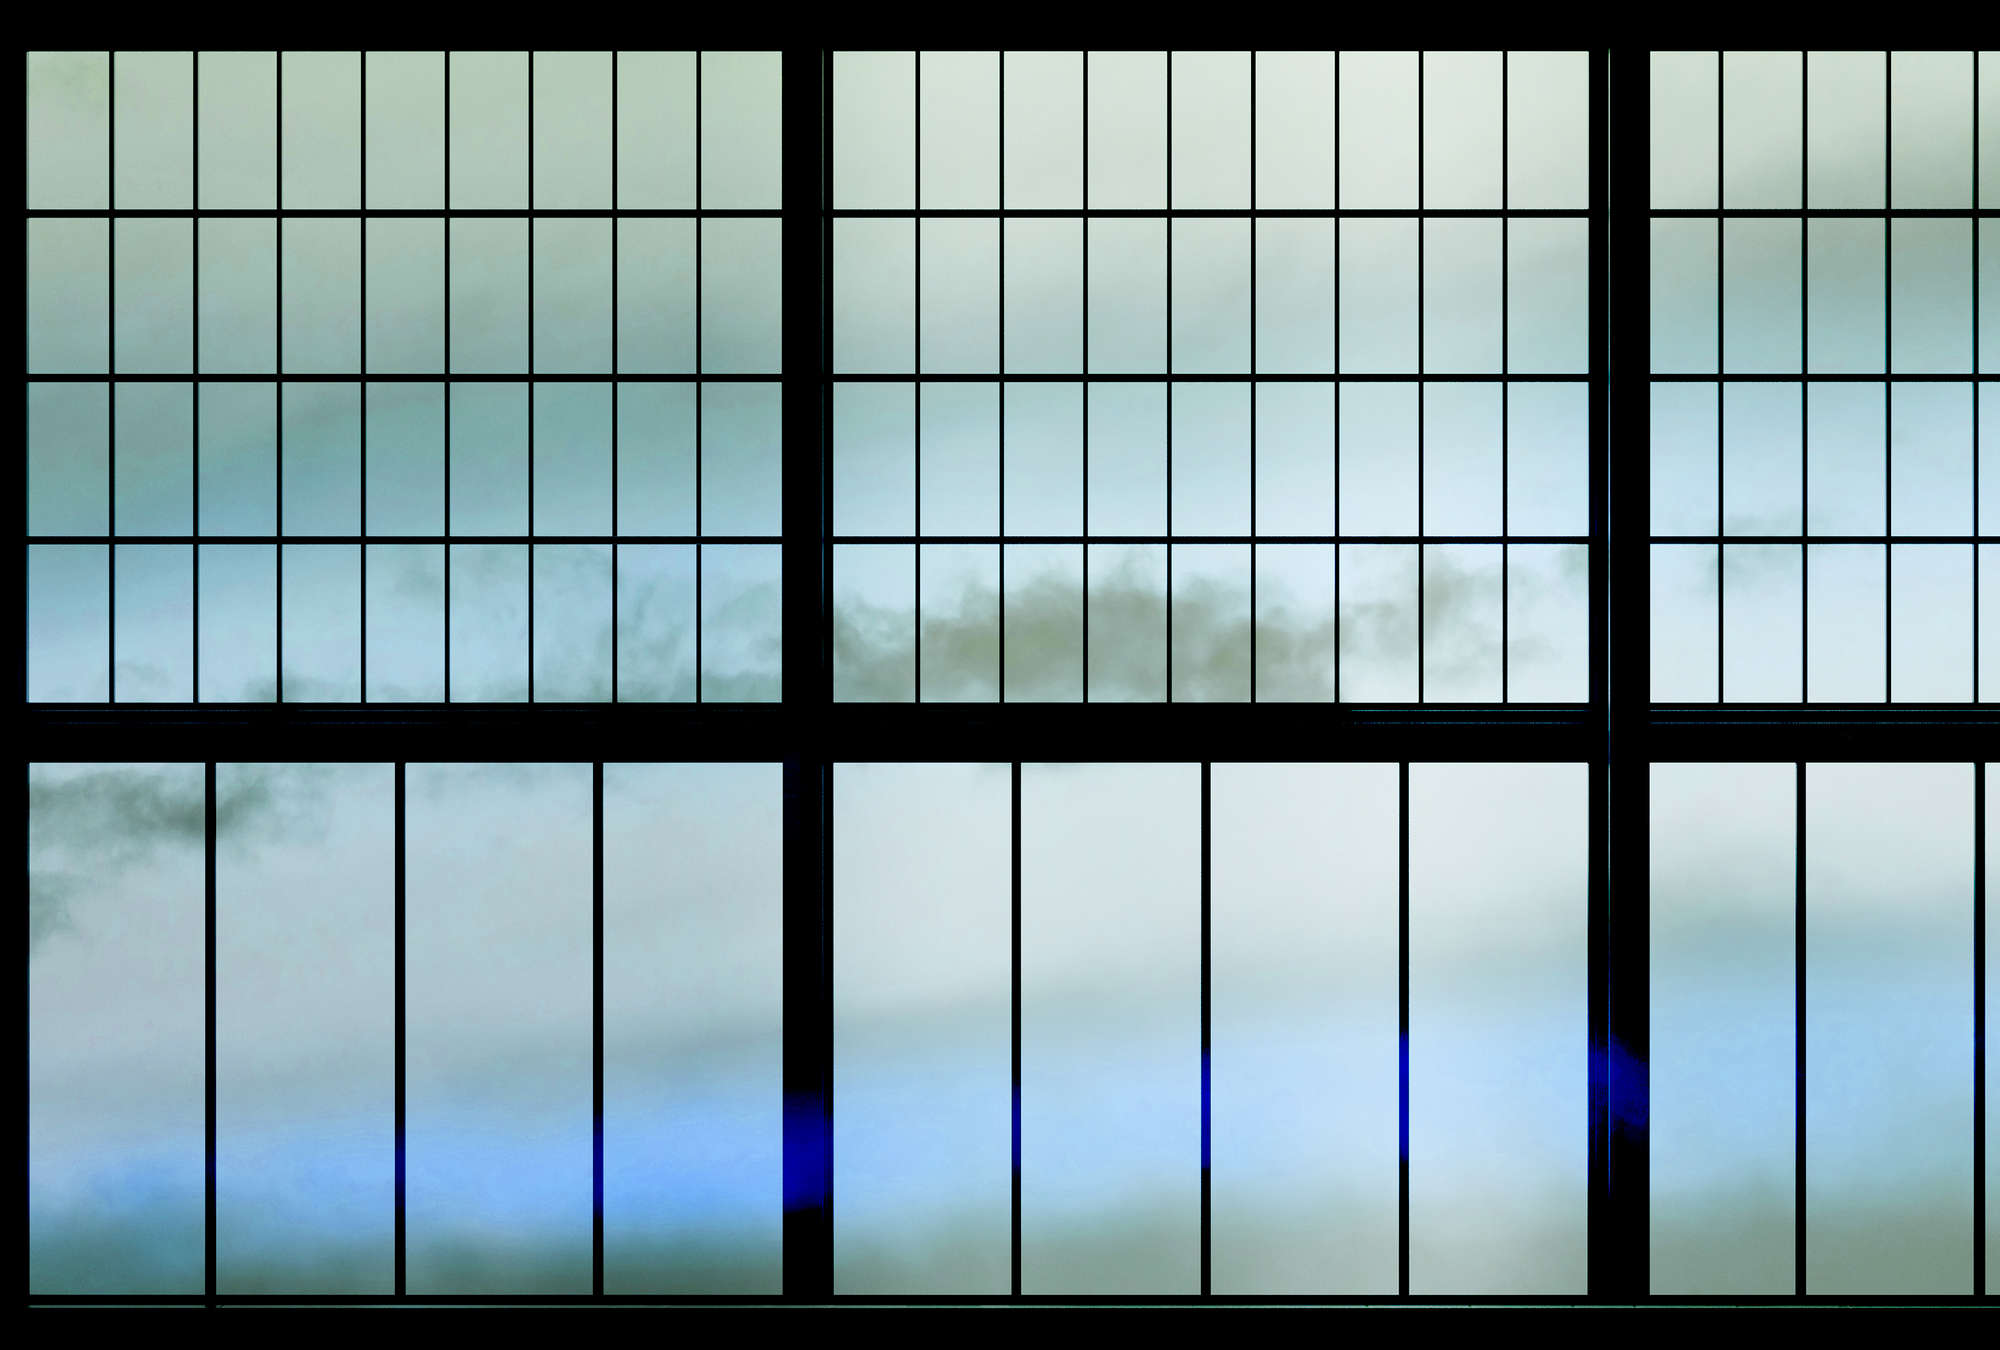             Sky 3 - Muntin Window with Cloudy Sky Wallpaper - Blue, Black | Premium Smooth Non-woven
        